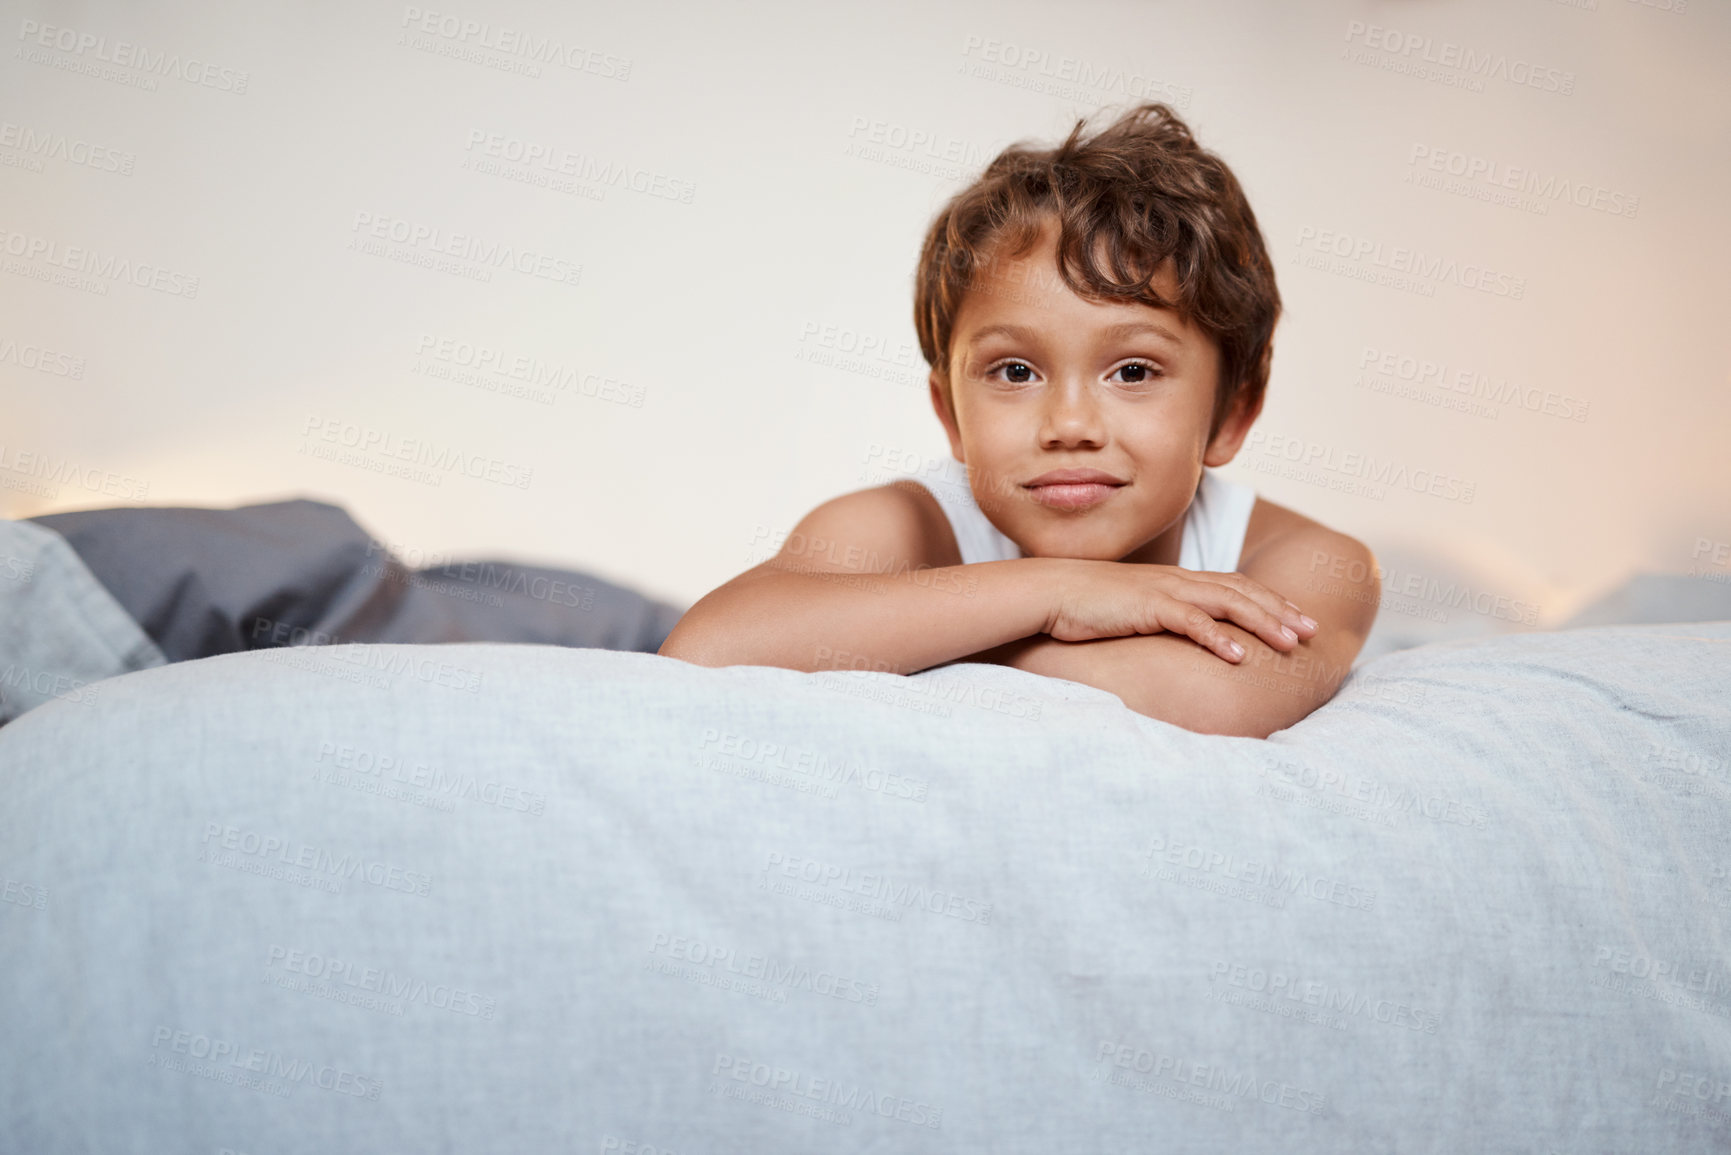 Buy stock photo Shot of an adorable young boy lying on his bed